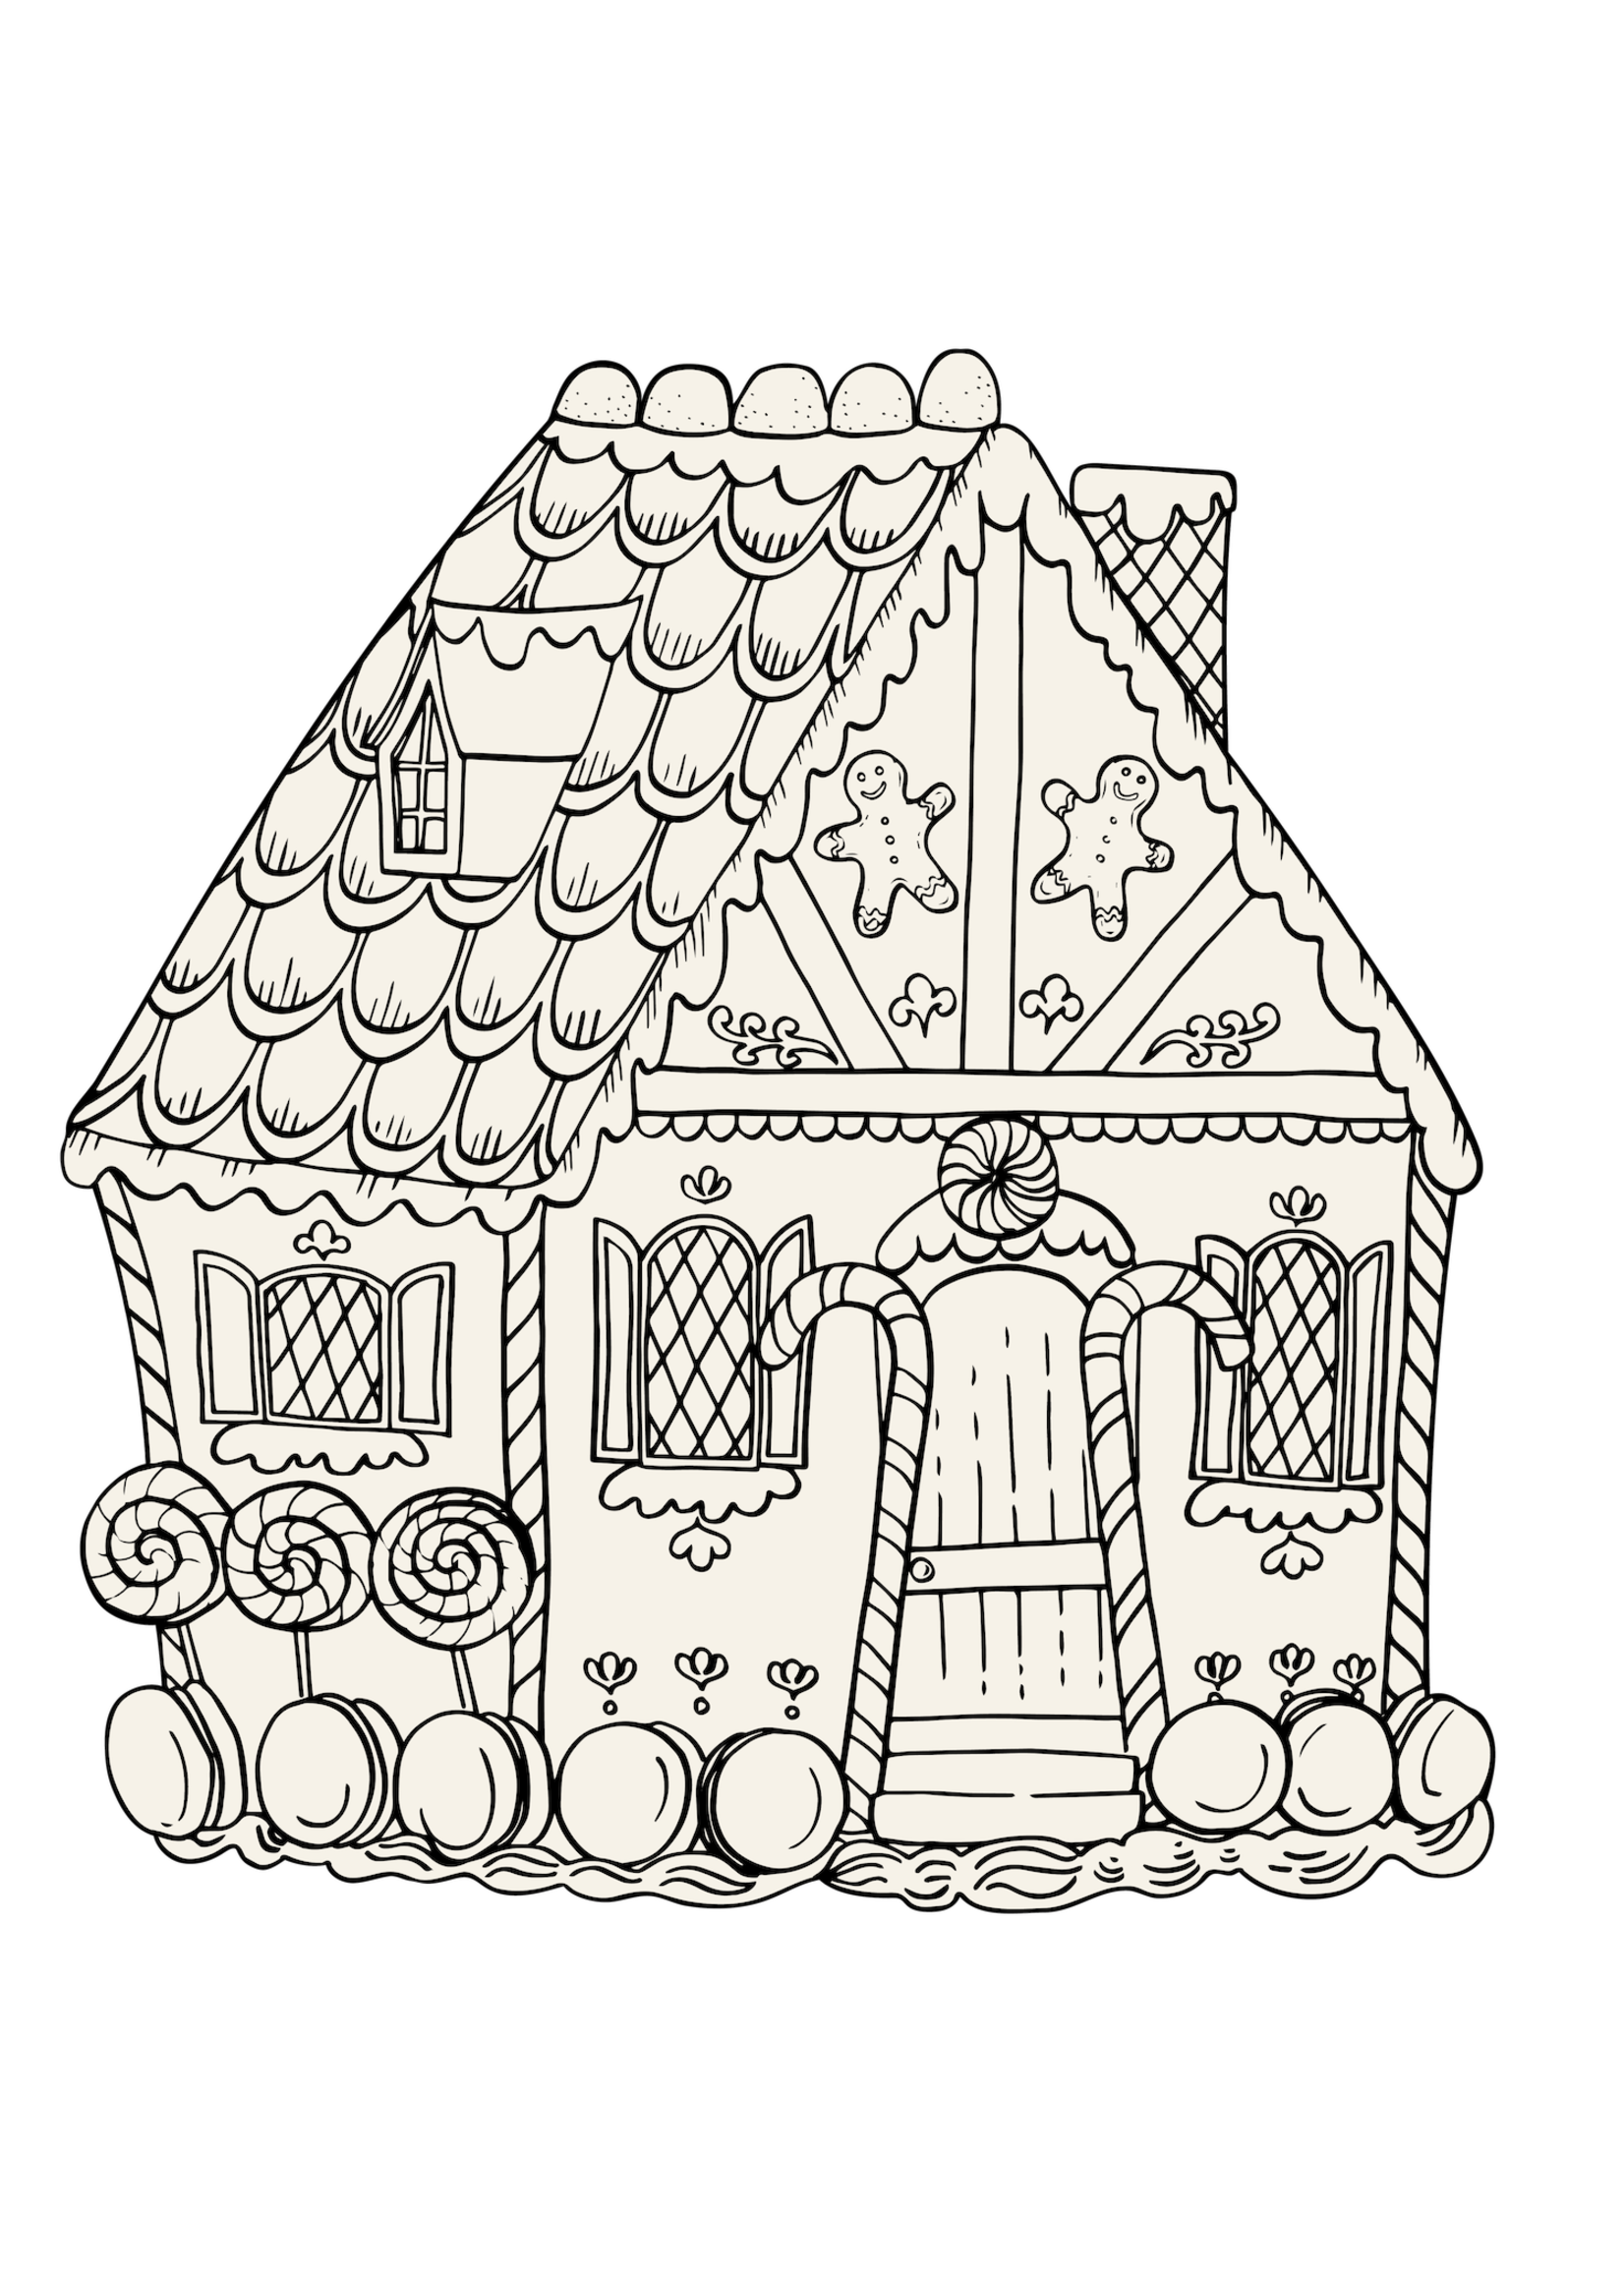 Hester & Cook Paper Placemats - Coloring Gingerbread House (12 sheets)